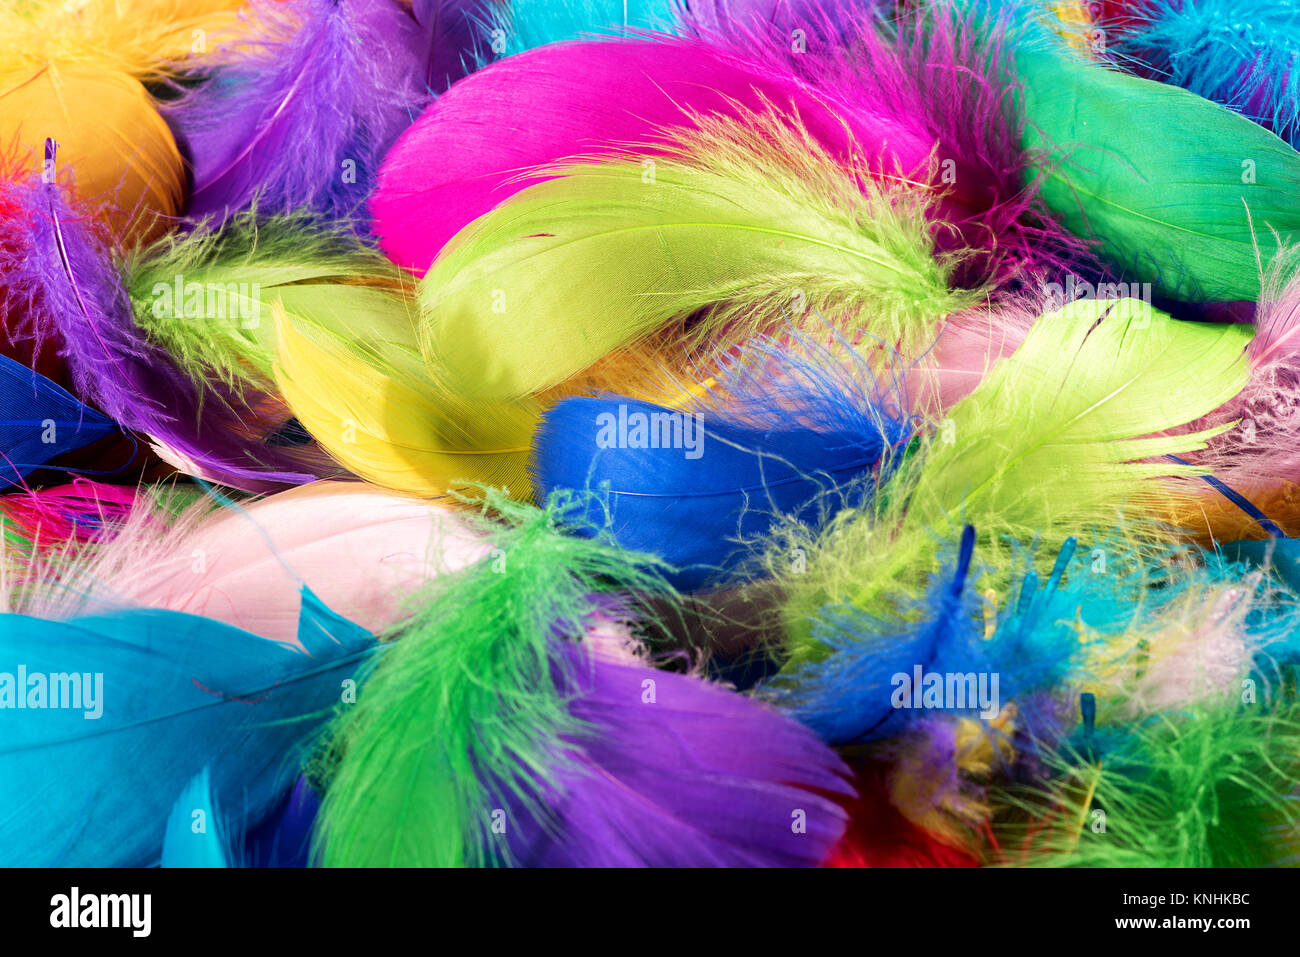 Background texture of soft fluffy colorful dyed bird feathers in bright rainbow colours in a close up full frame view Stock Photo